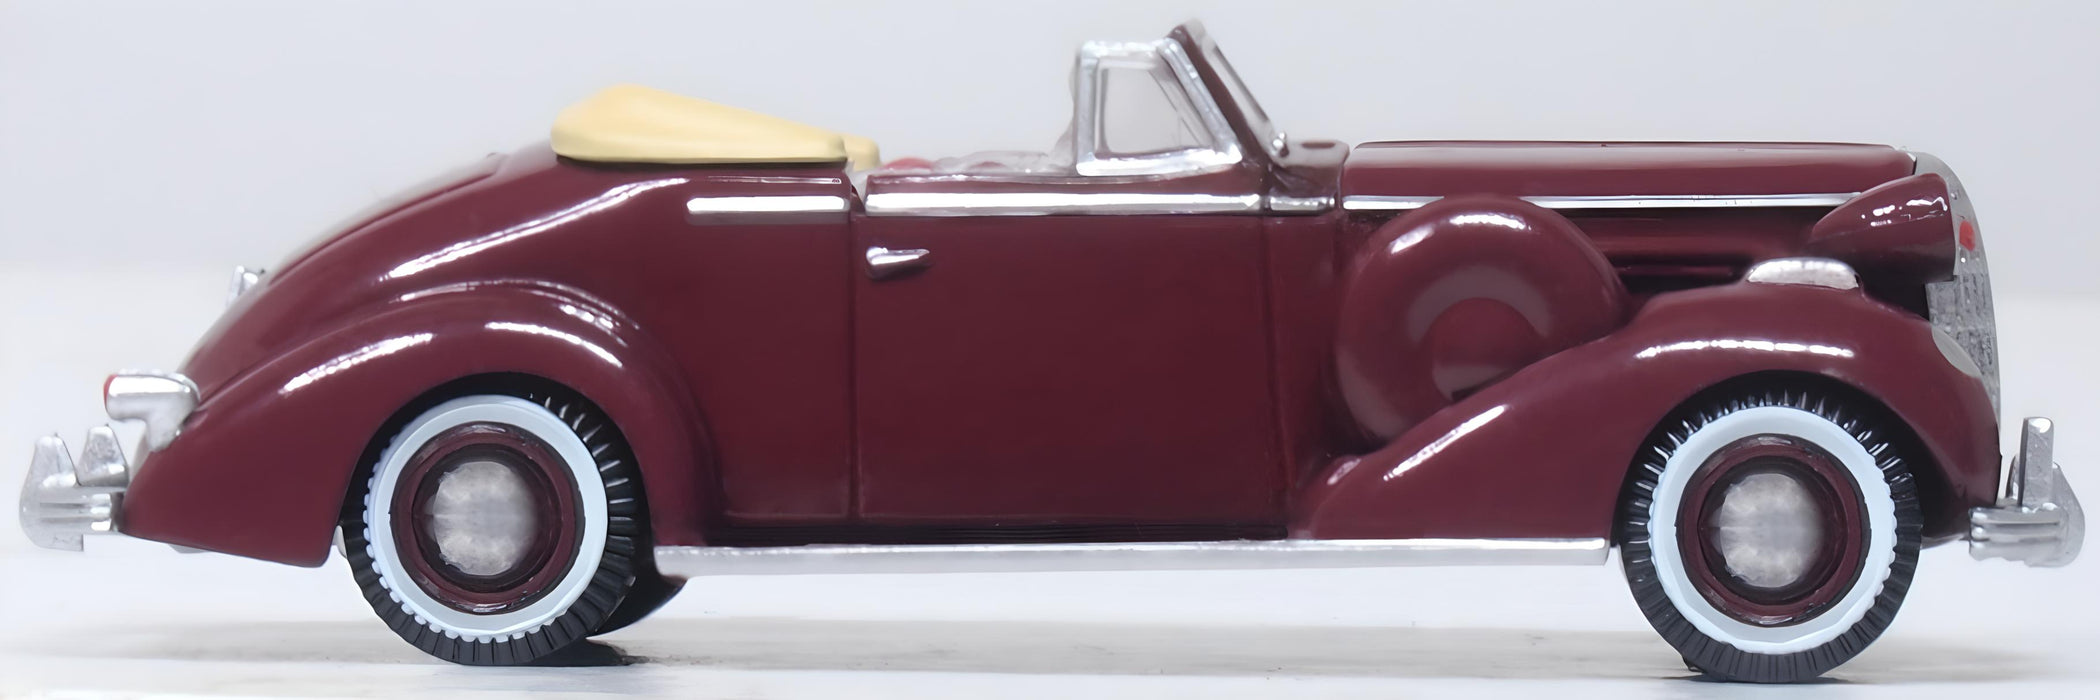 Oxford Diecast 1:87 Buick Special Convertible Coupe 1936 Cardinal Maroon 87BS36003 Right